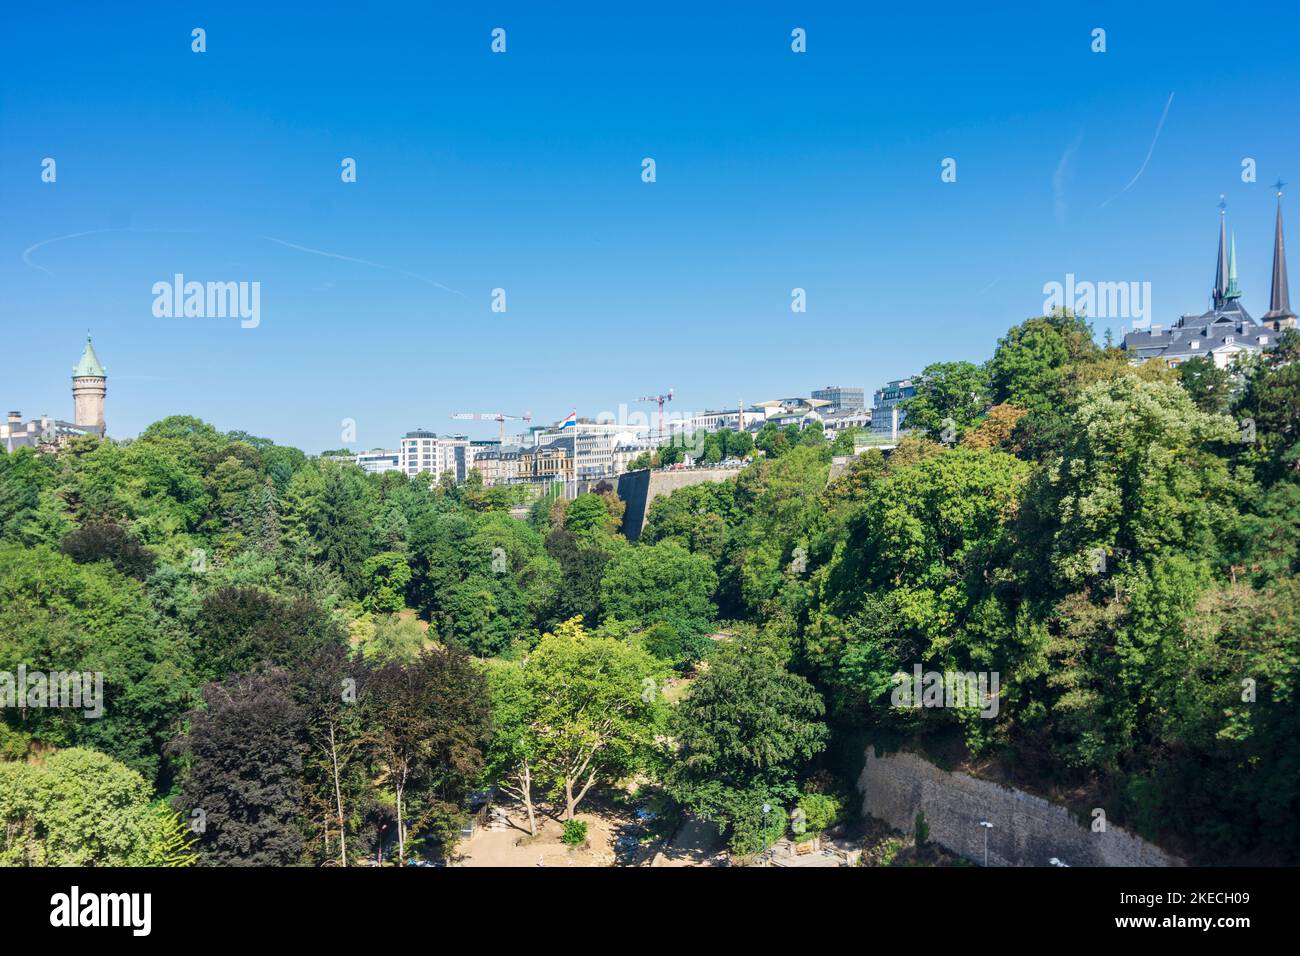 Luxembourg City (Lëtzebuerg / Luxemburg), Pétrusse river valley, old town in Luxembourg Stock Photo